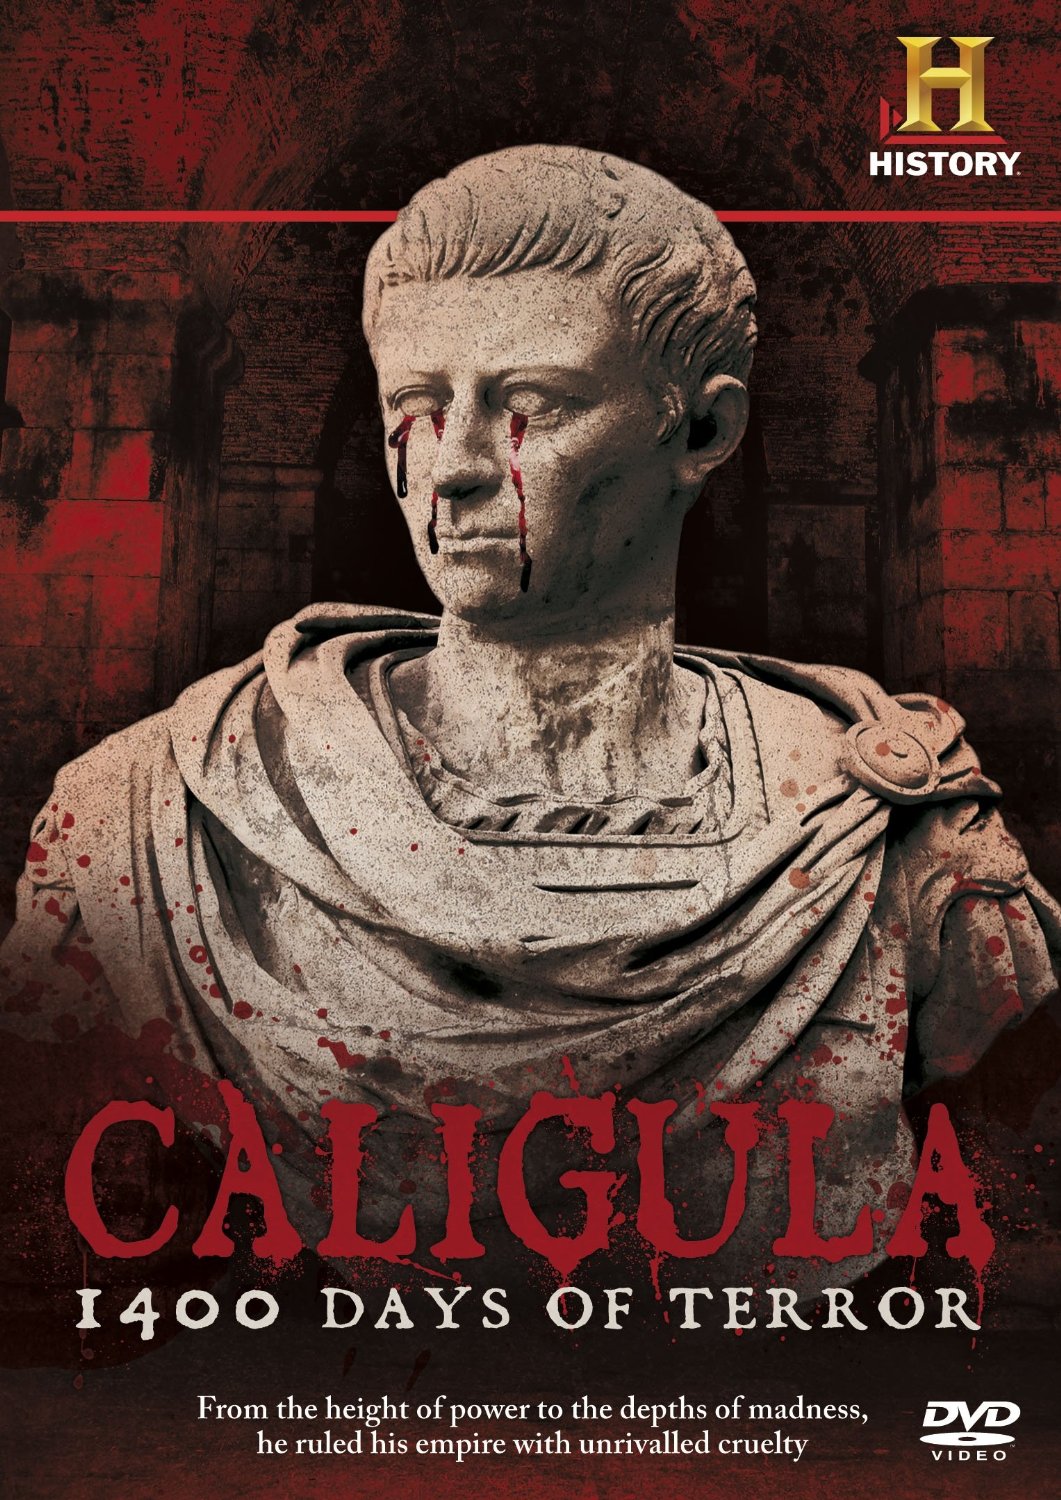 dana dufault recommends watch caligula online free pic